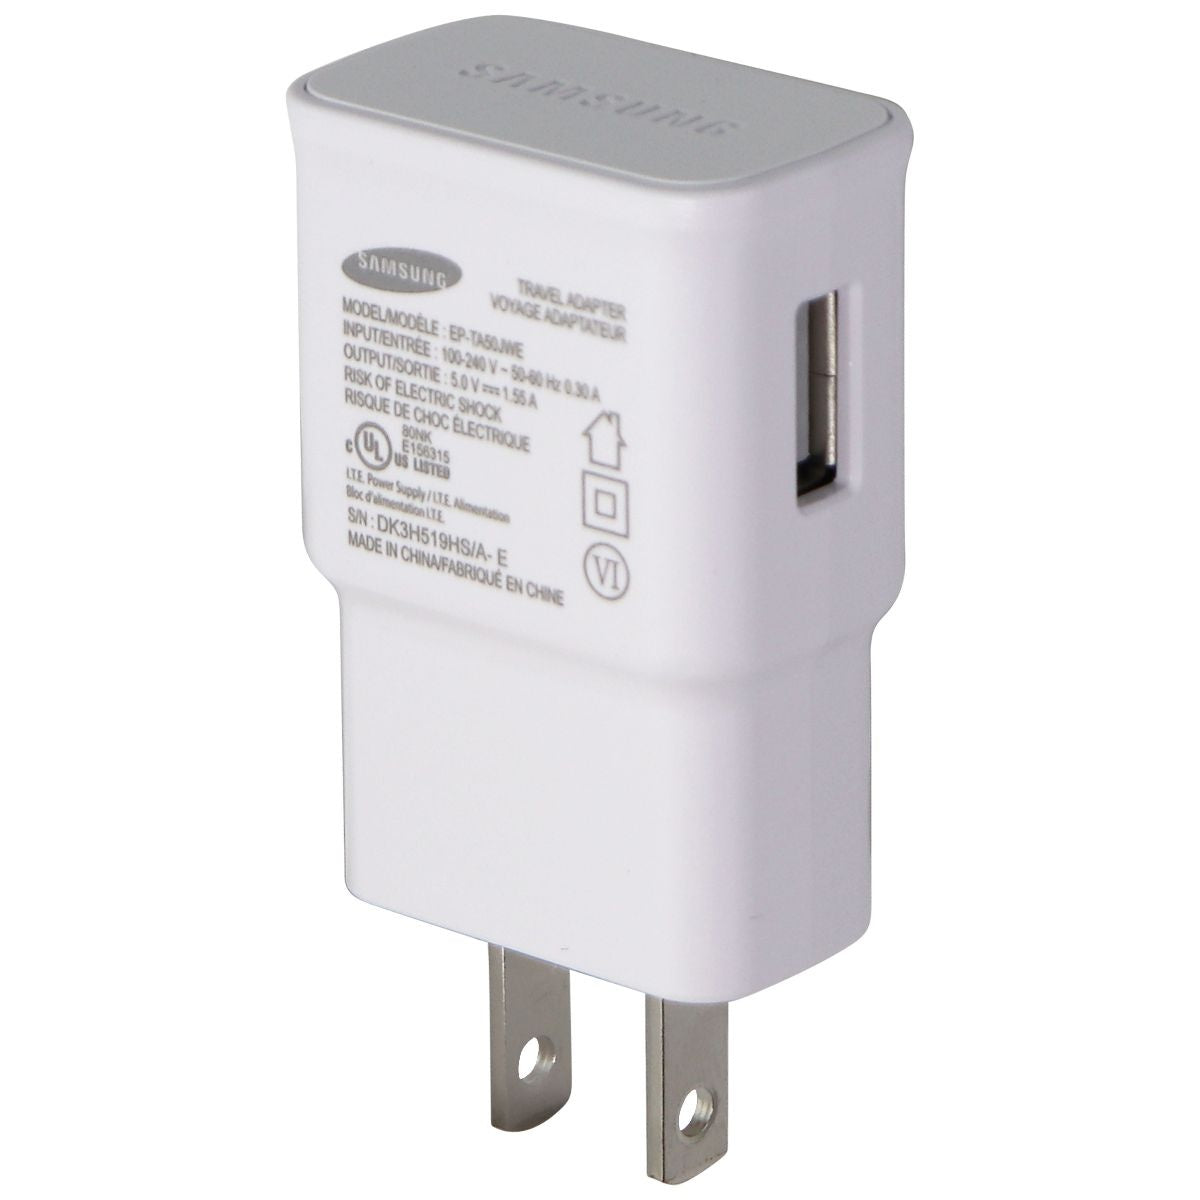 Samsung (5V/1.55A) Single USB Wall Charger / Travel Adapter - White (EP-TA50JWE)